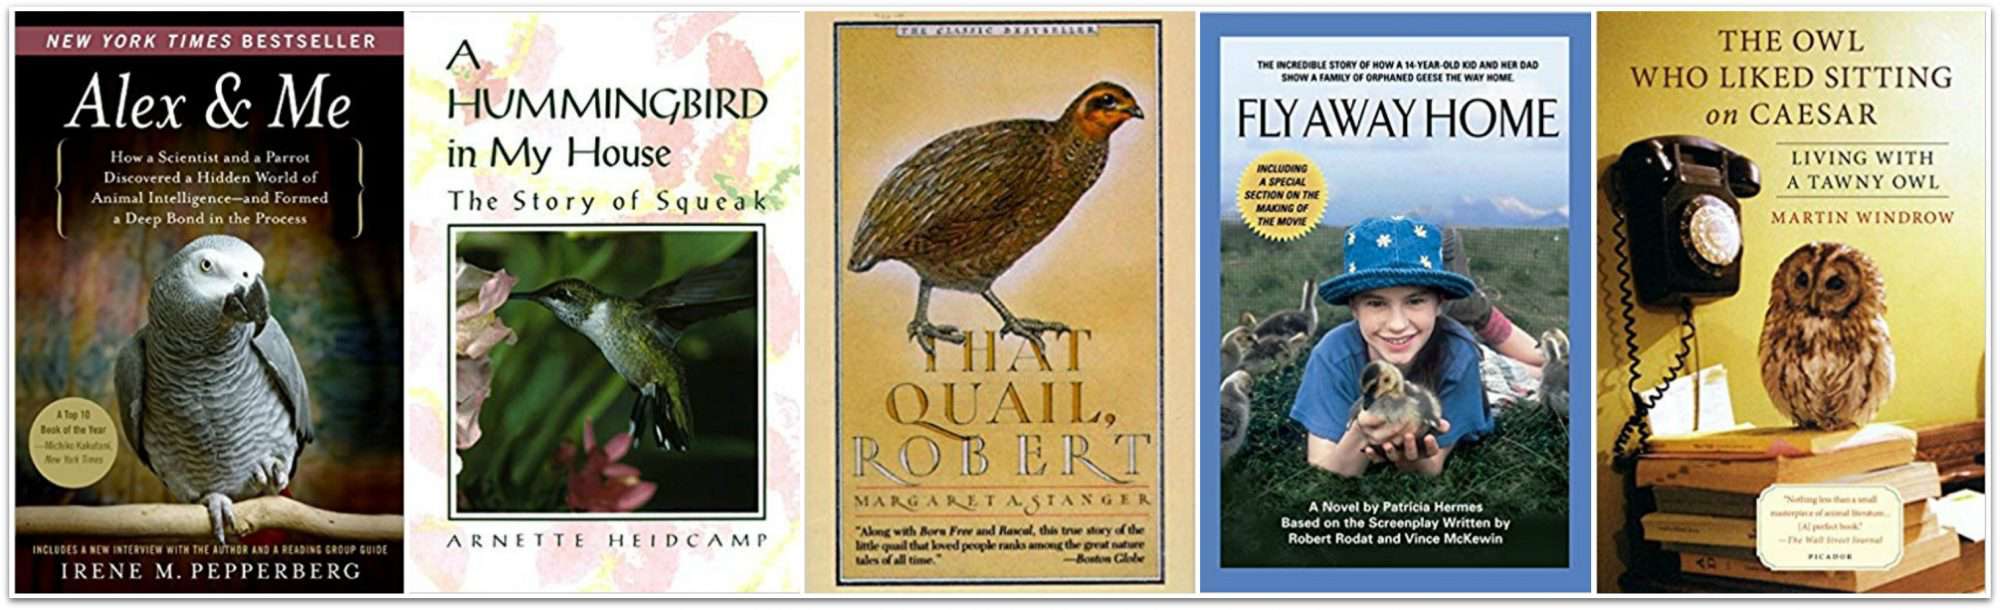 57 K - Gr. 5 True Story Nature & Science Books For Curious Kids. 5 books about animals that lived closely with humans on the reading list.